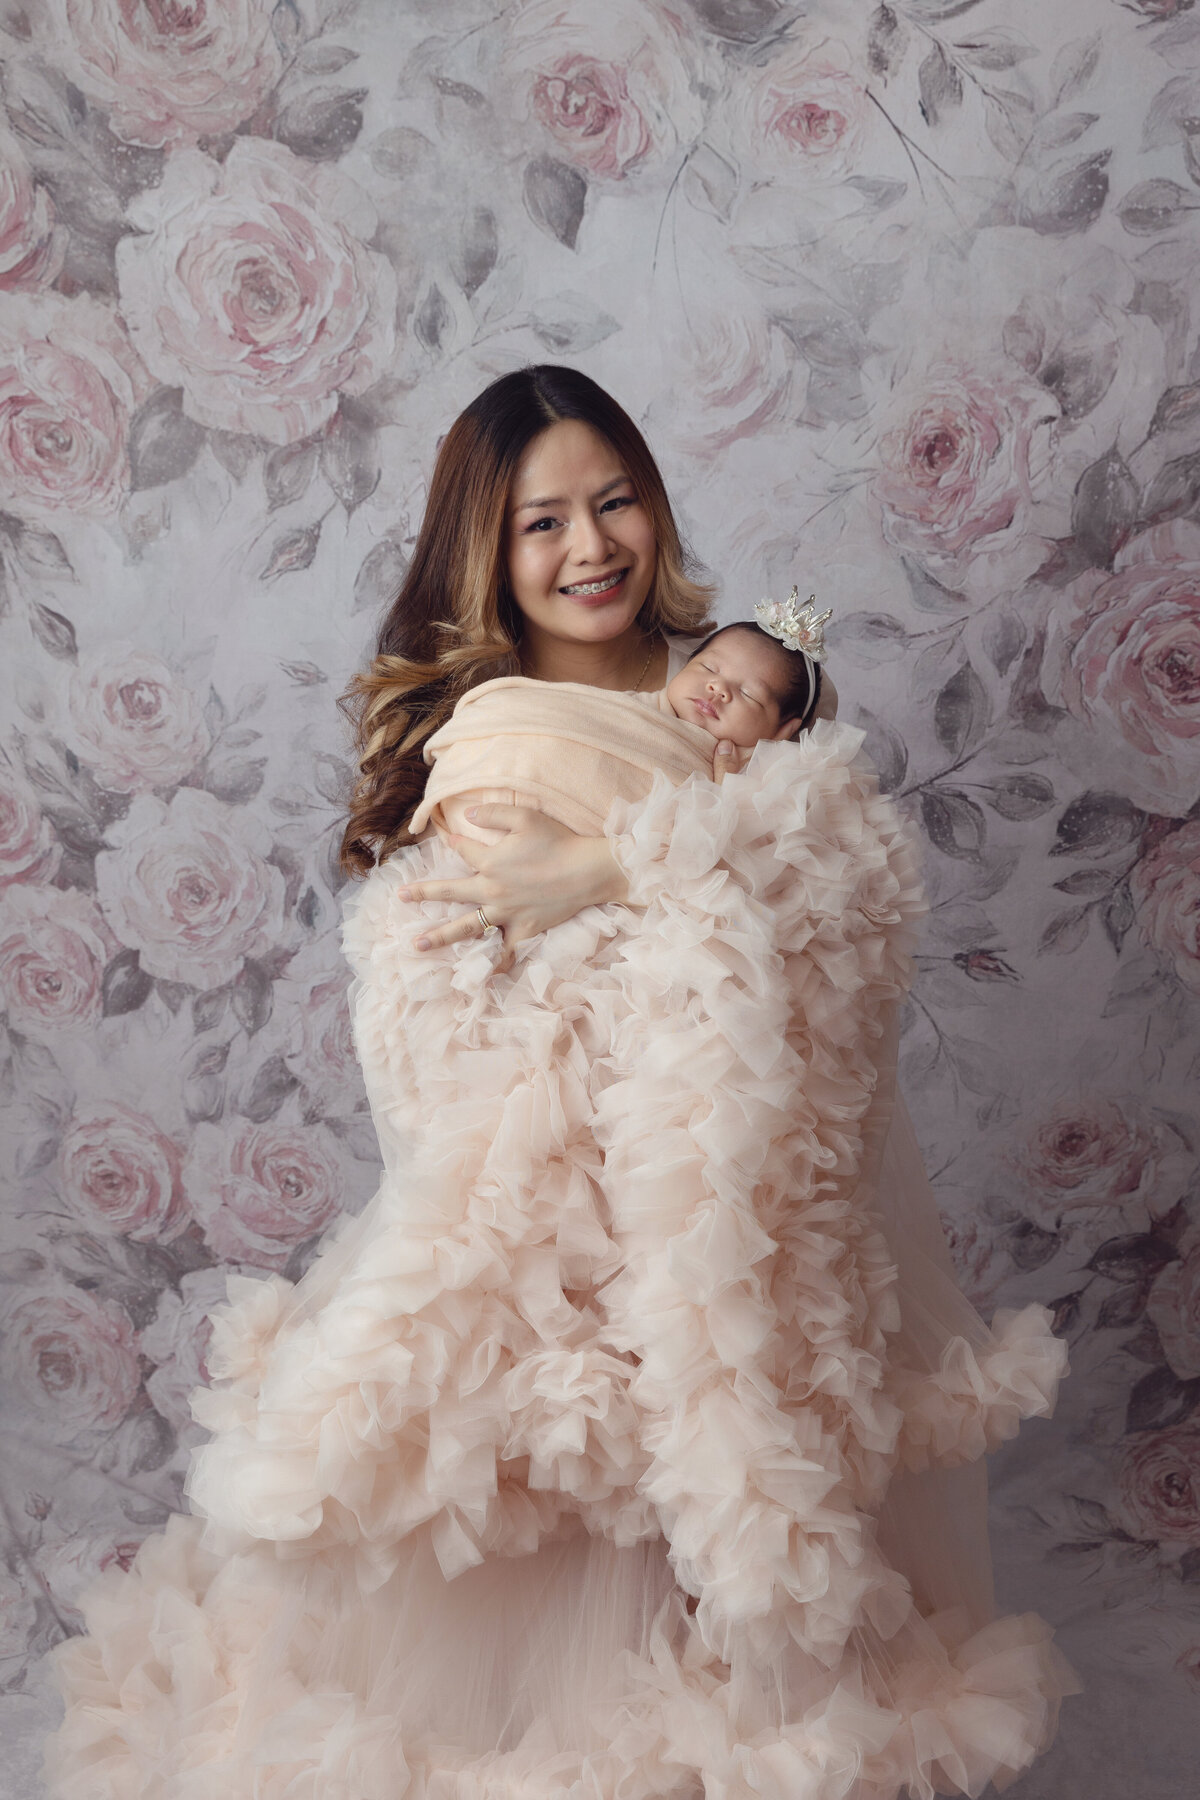 A mother in a flowing tule dress smiles with her sleeping newborn baby daughter in her arms in a matching swaddle